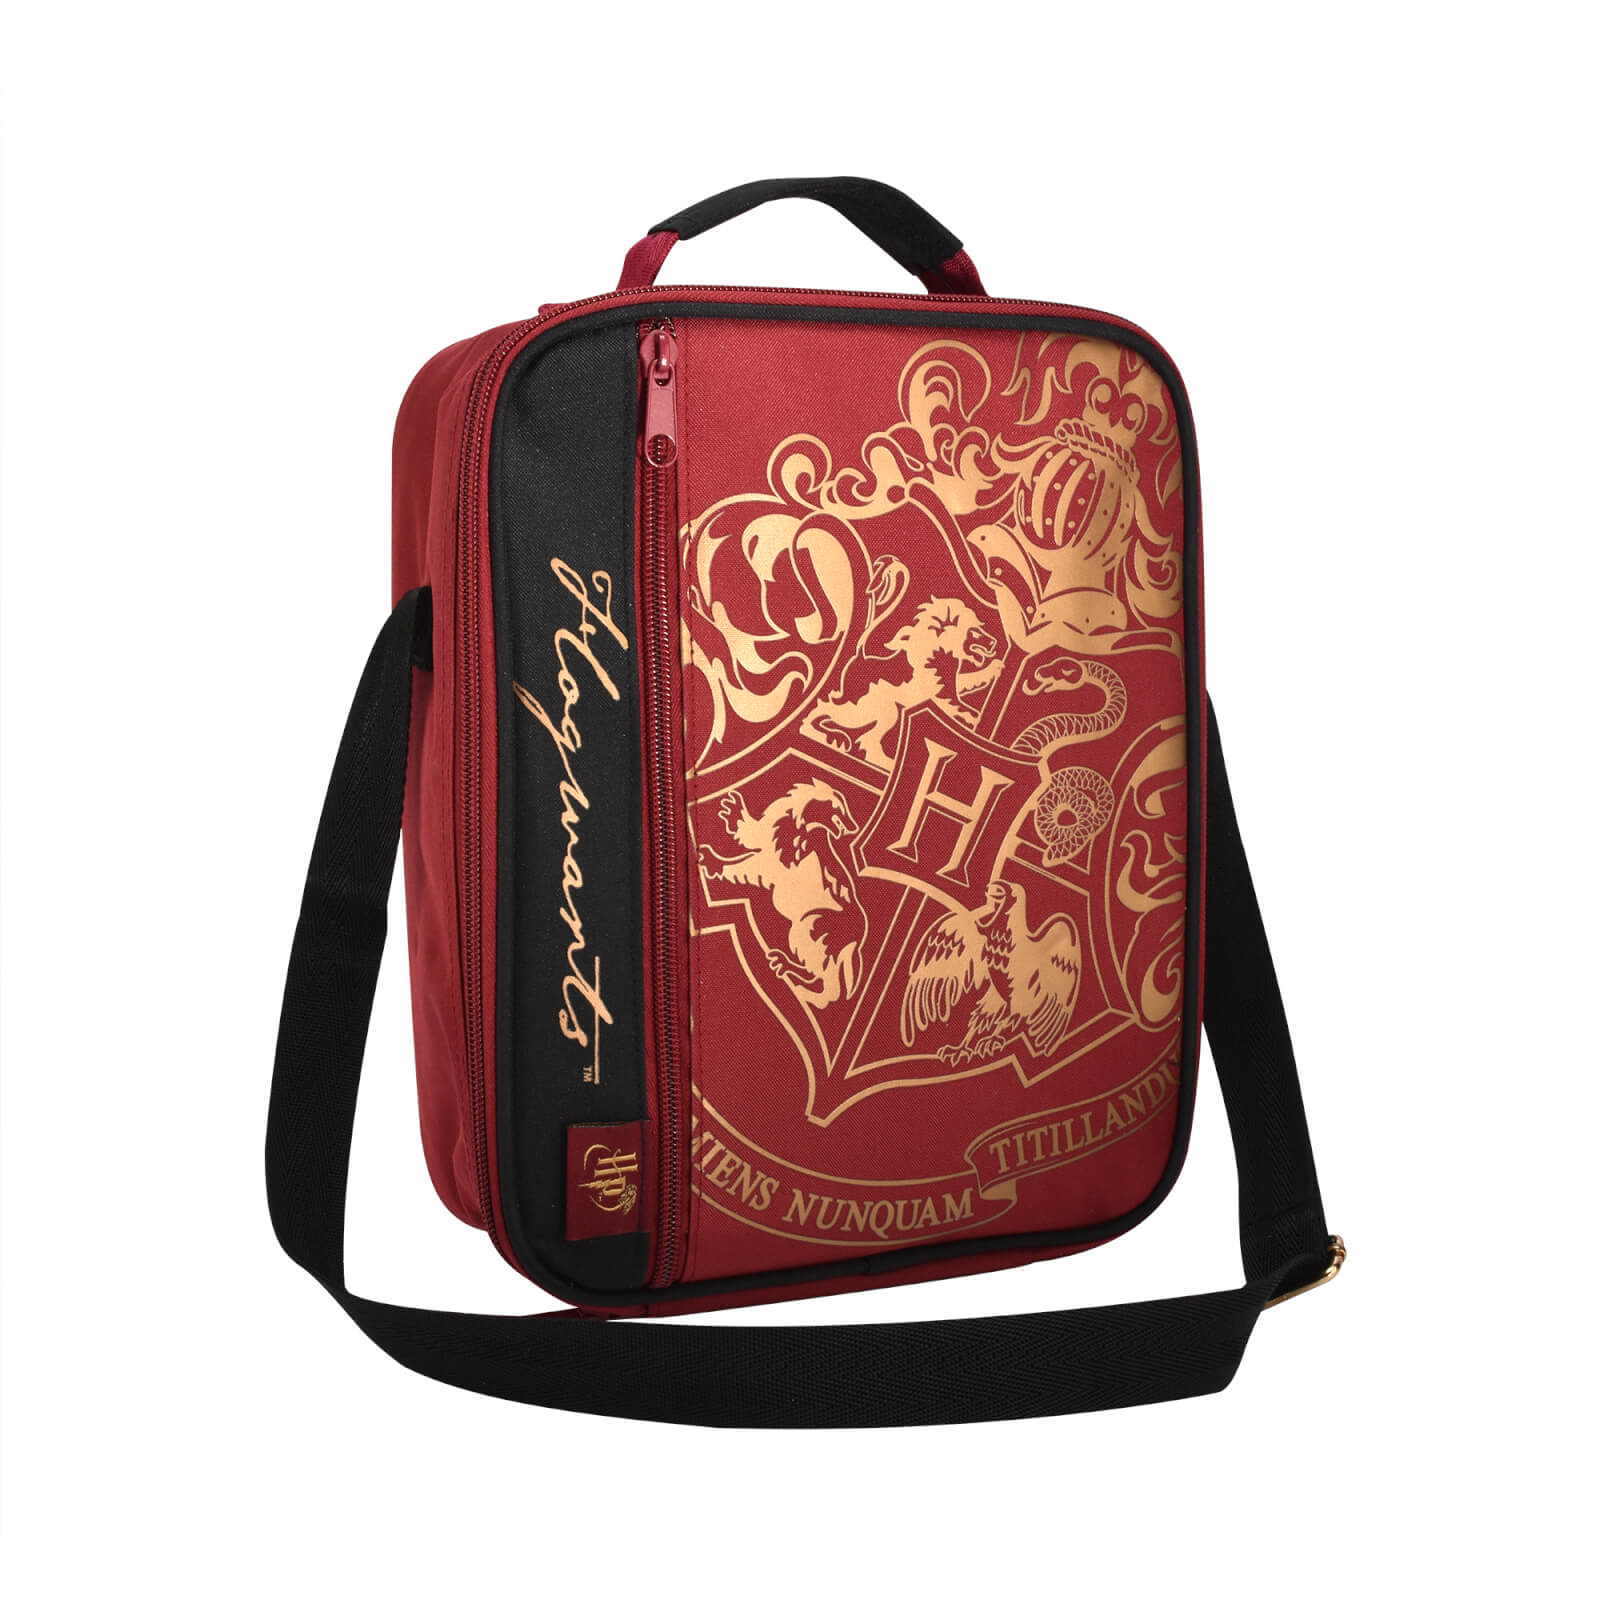 Image of Harry Potter Deluxe 2 Pocket Lunch Bag